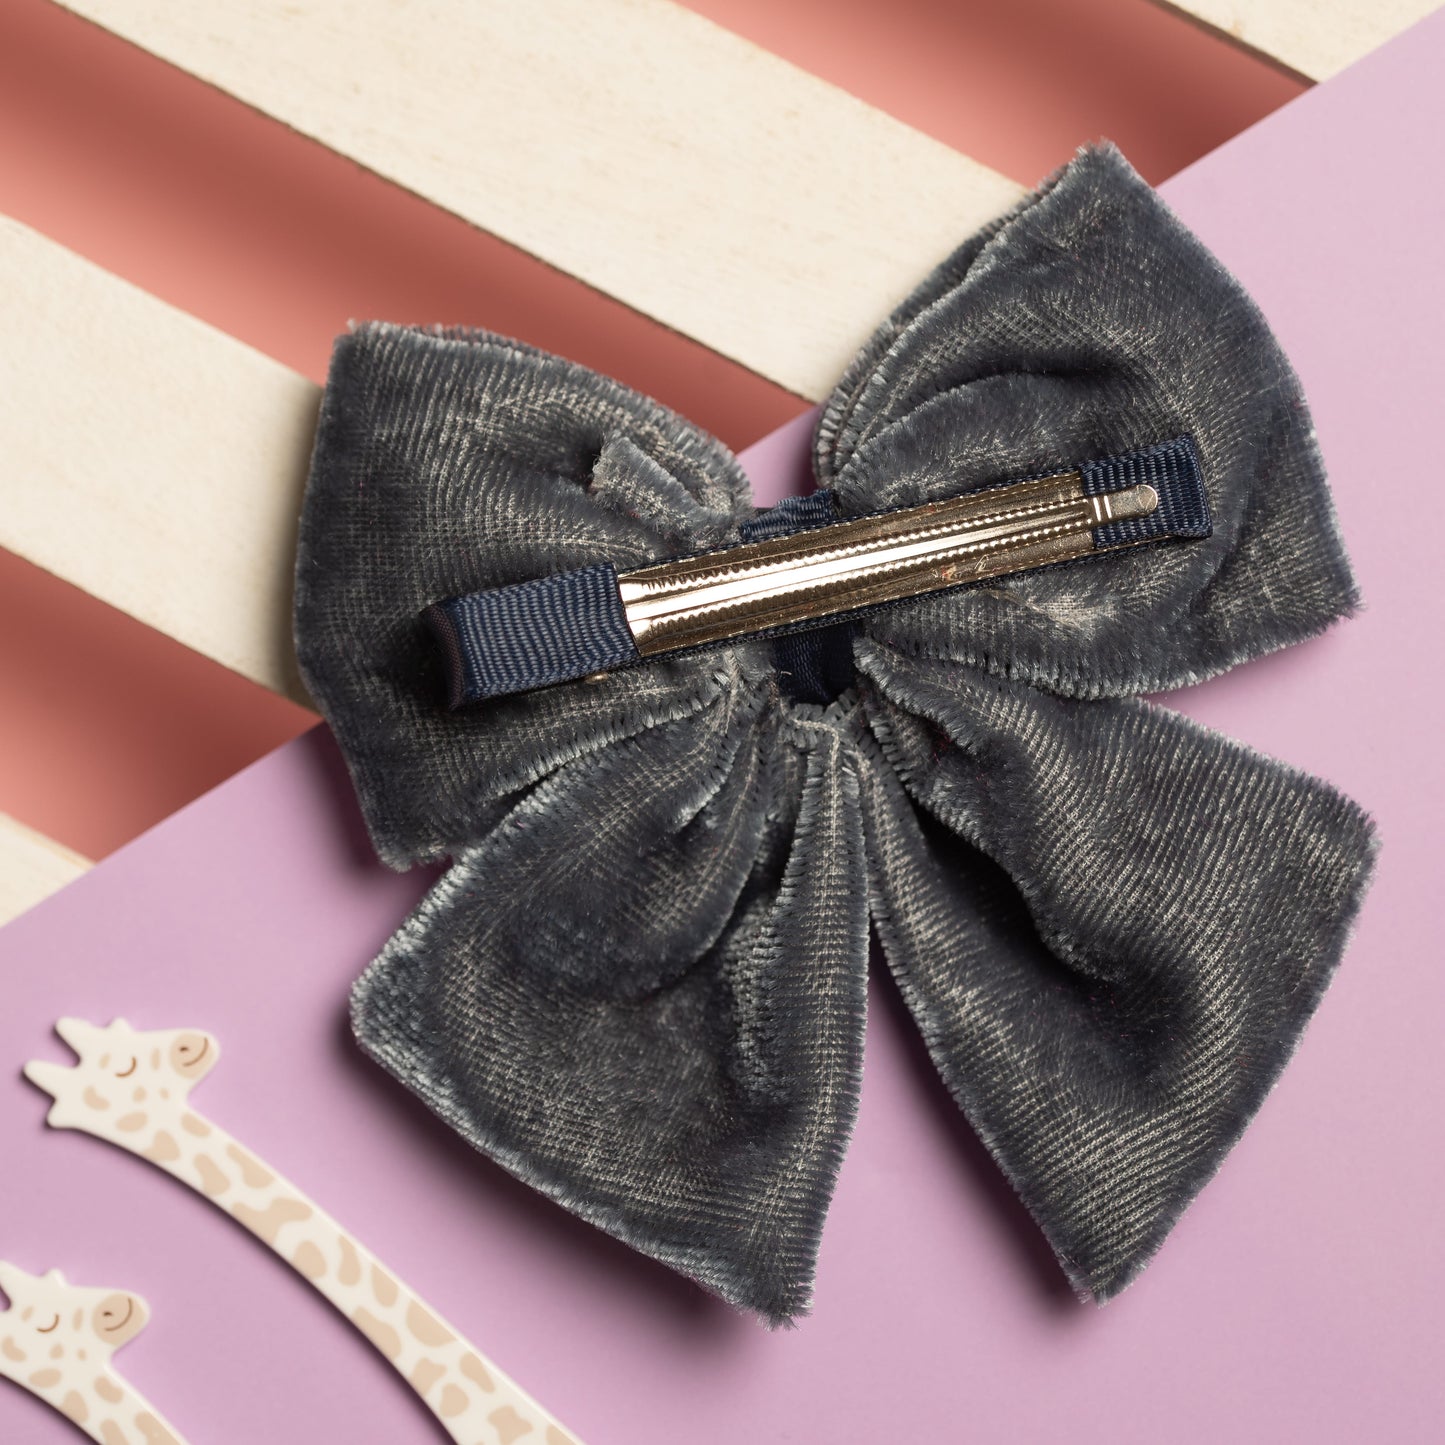 Ribbon Candy - Velvet Party Bow With Pearl Ditailing on Alligator Pin - Grey